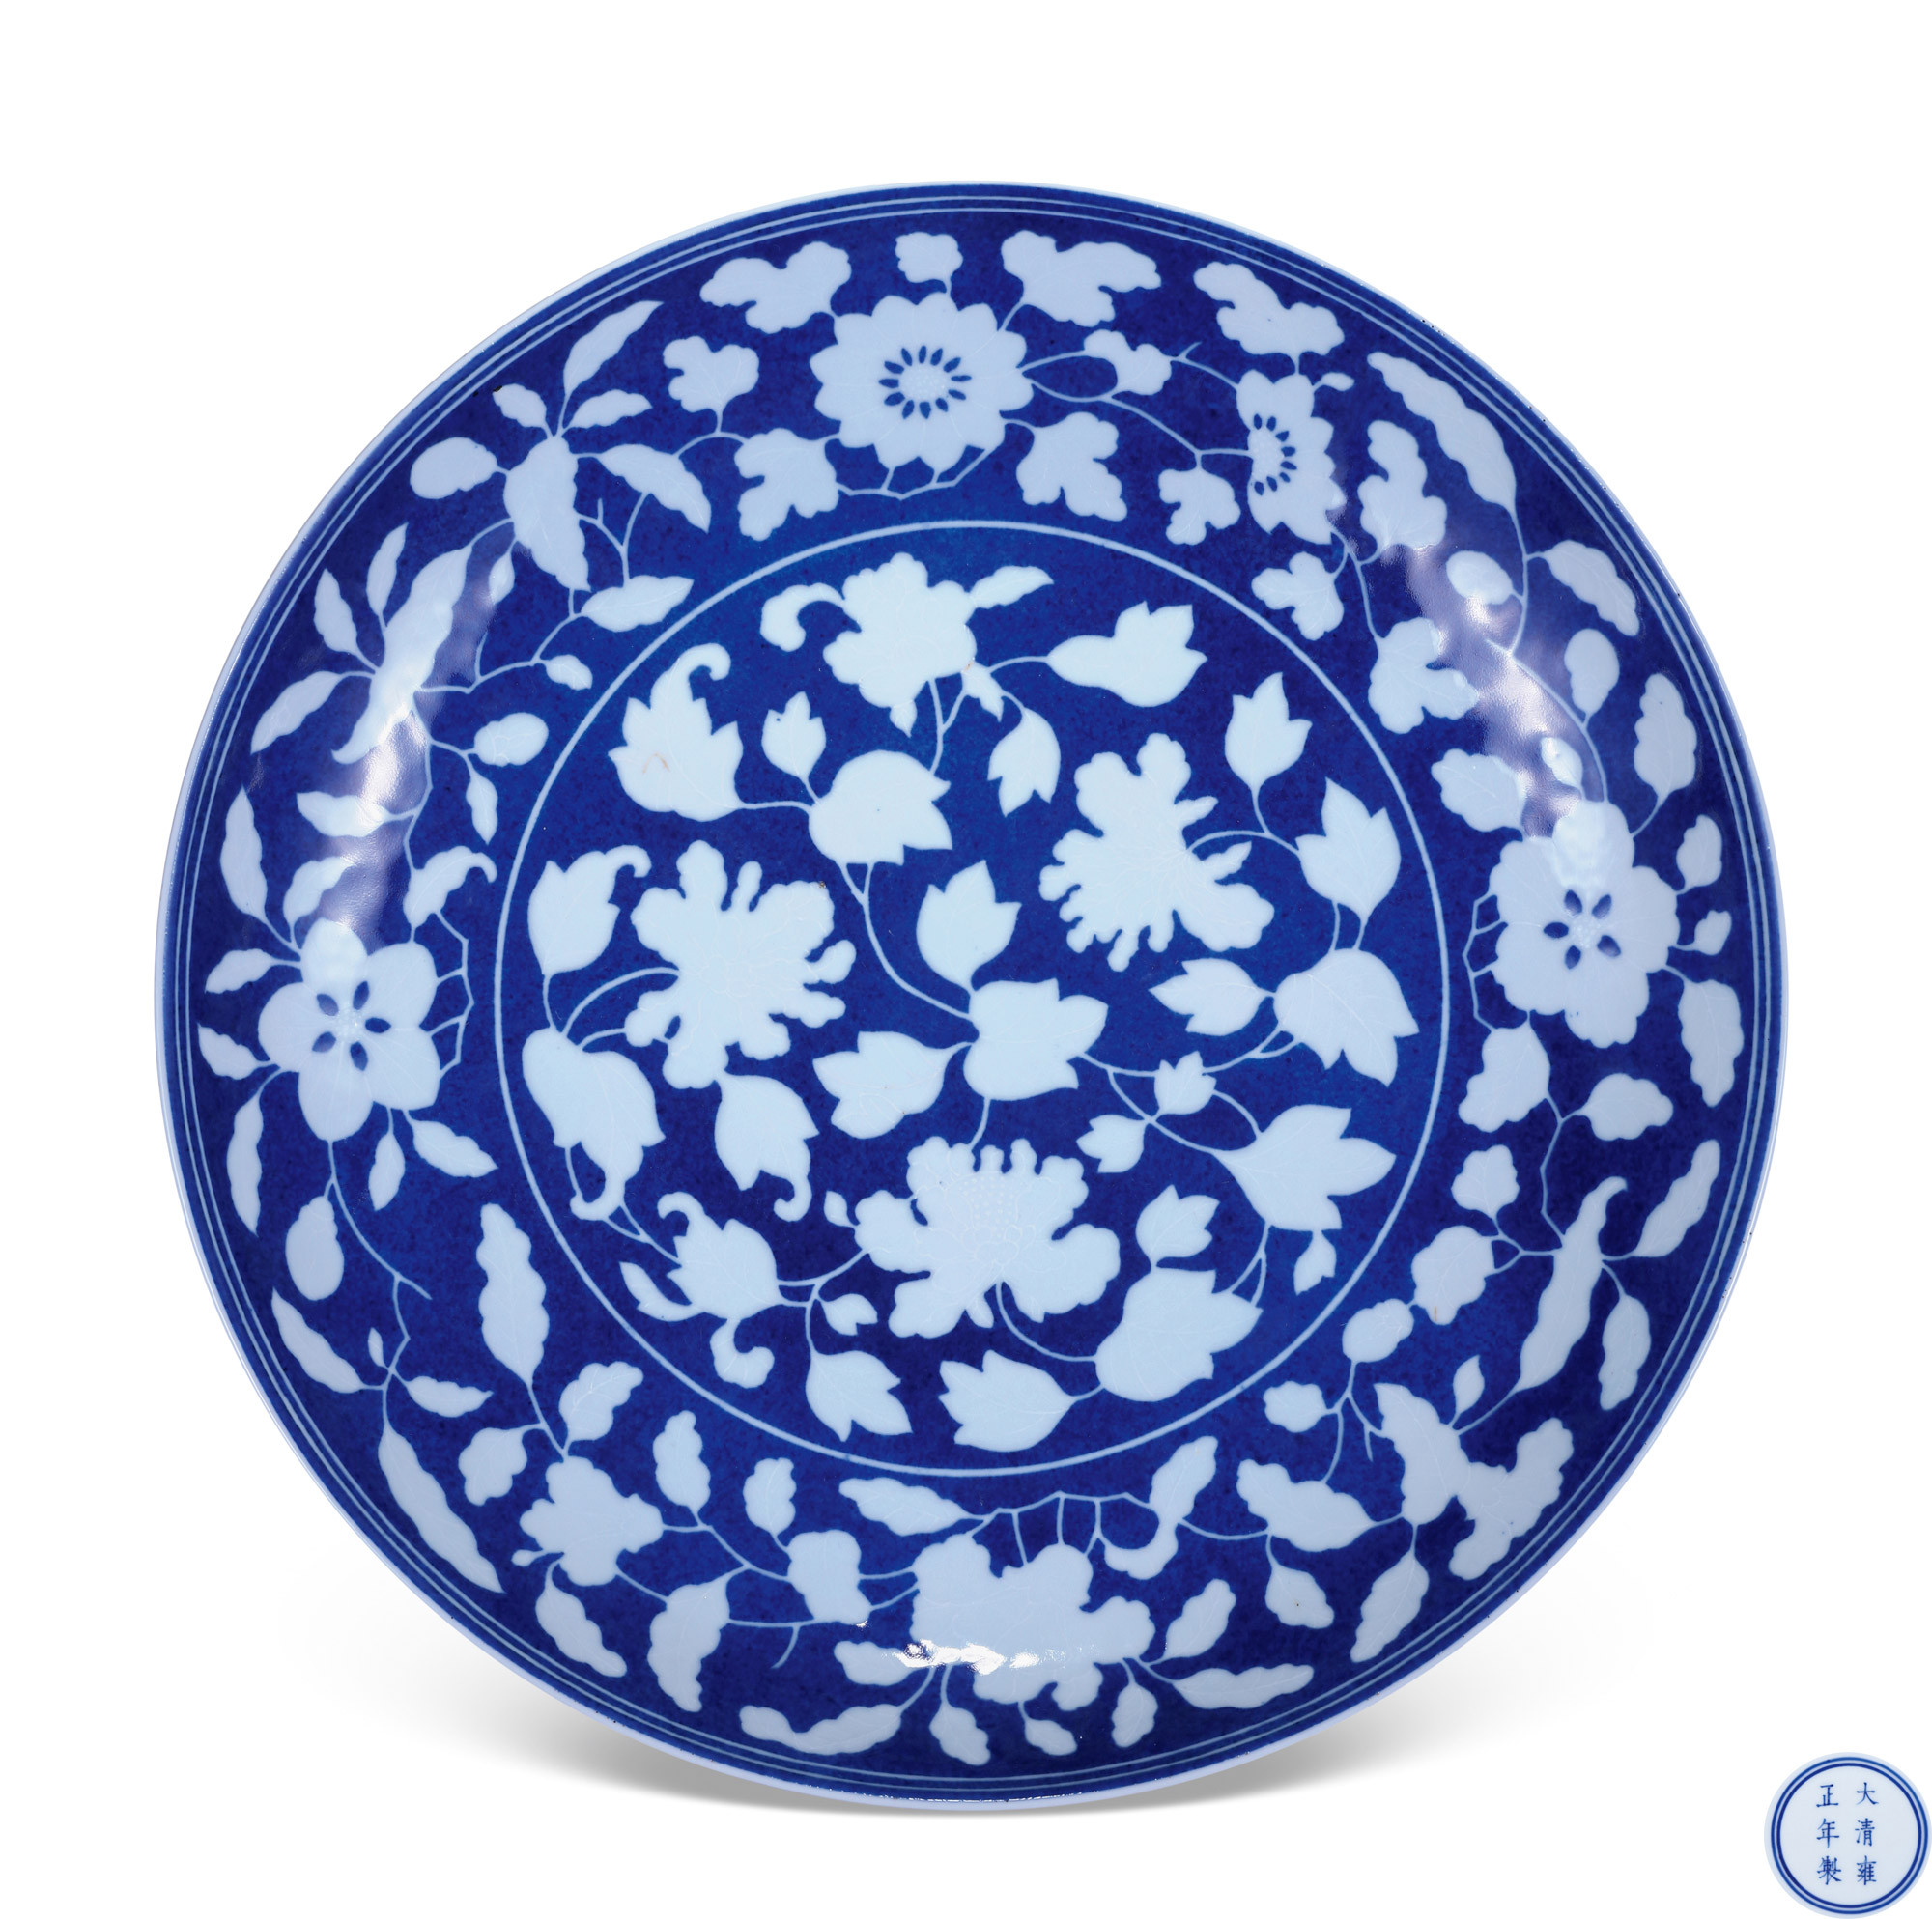 A RARE BLUE GROUND WITH REVERSE-DECORATED‘FLORAL’PLATE